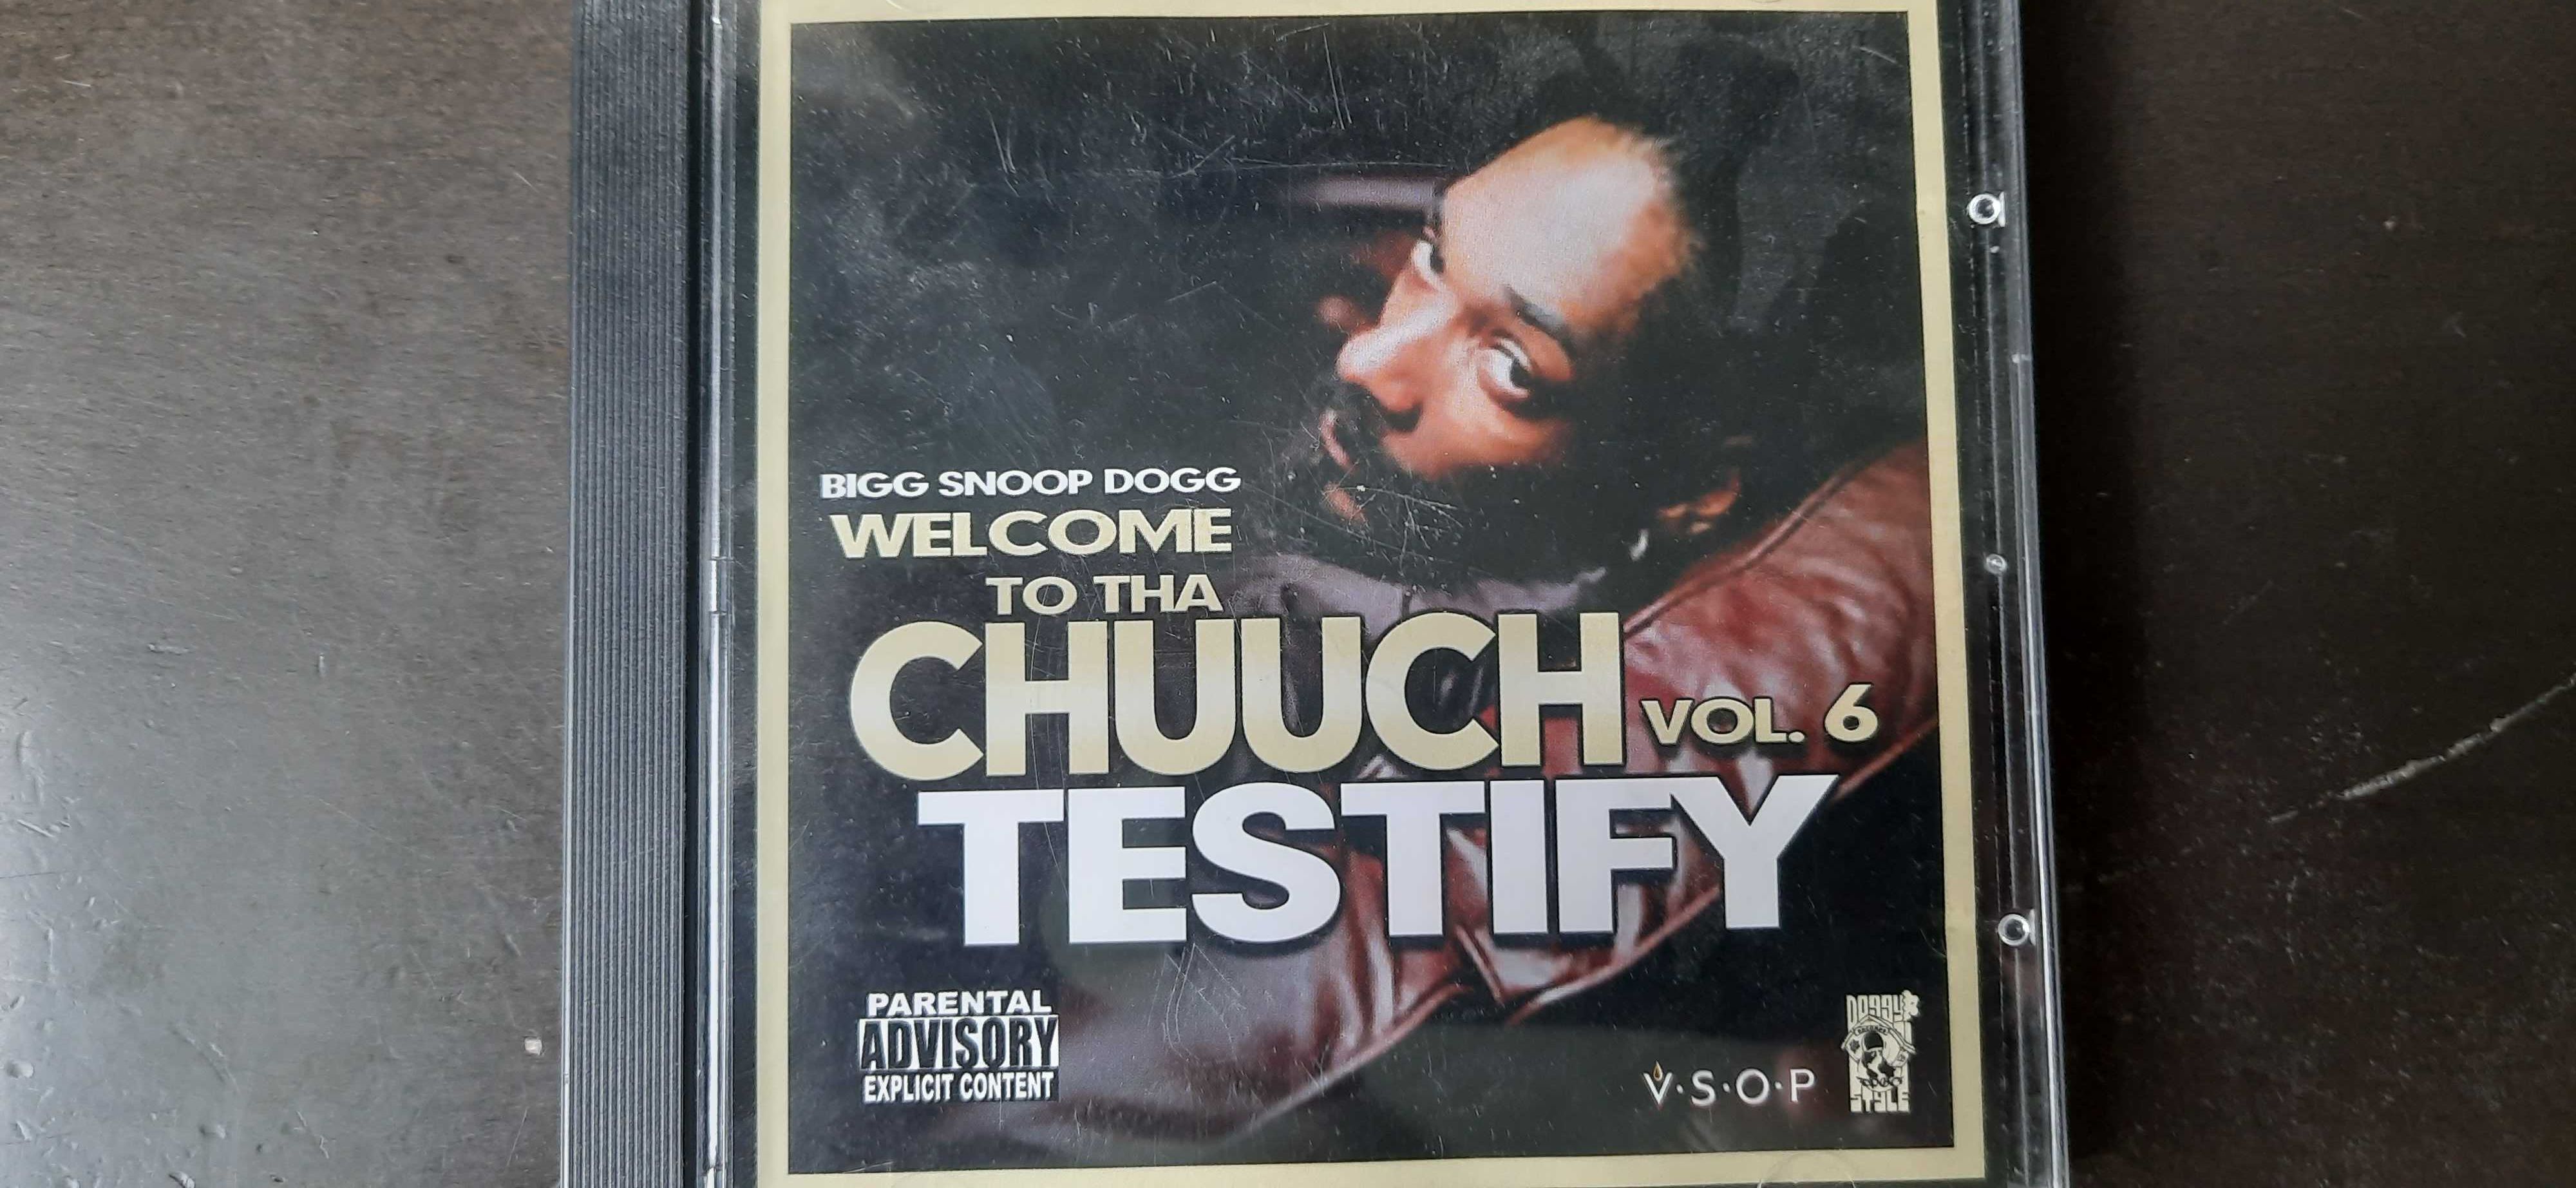 Bigg Snoop Dogg* - Welcome To Tha Chuuch Vol. 6 Testify
CD